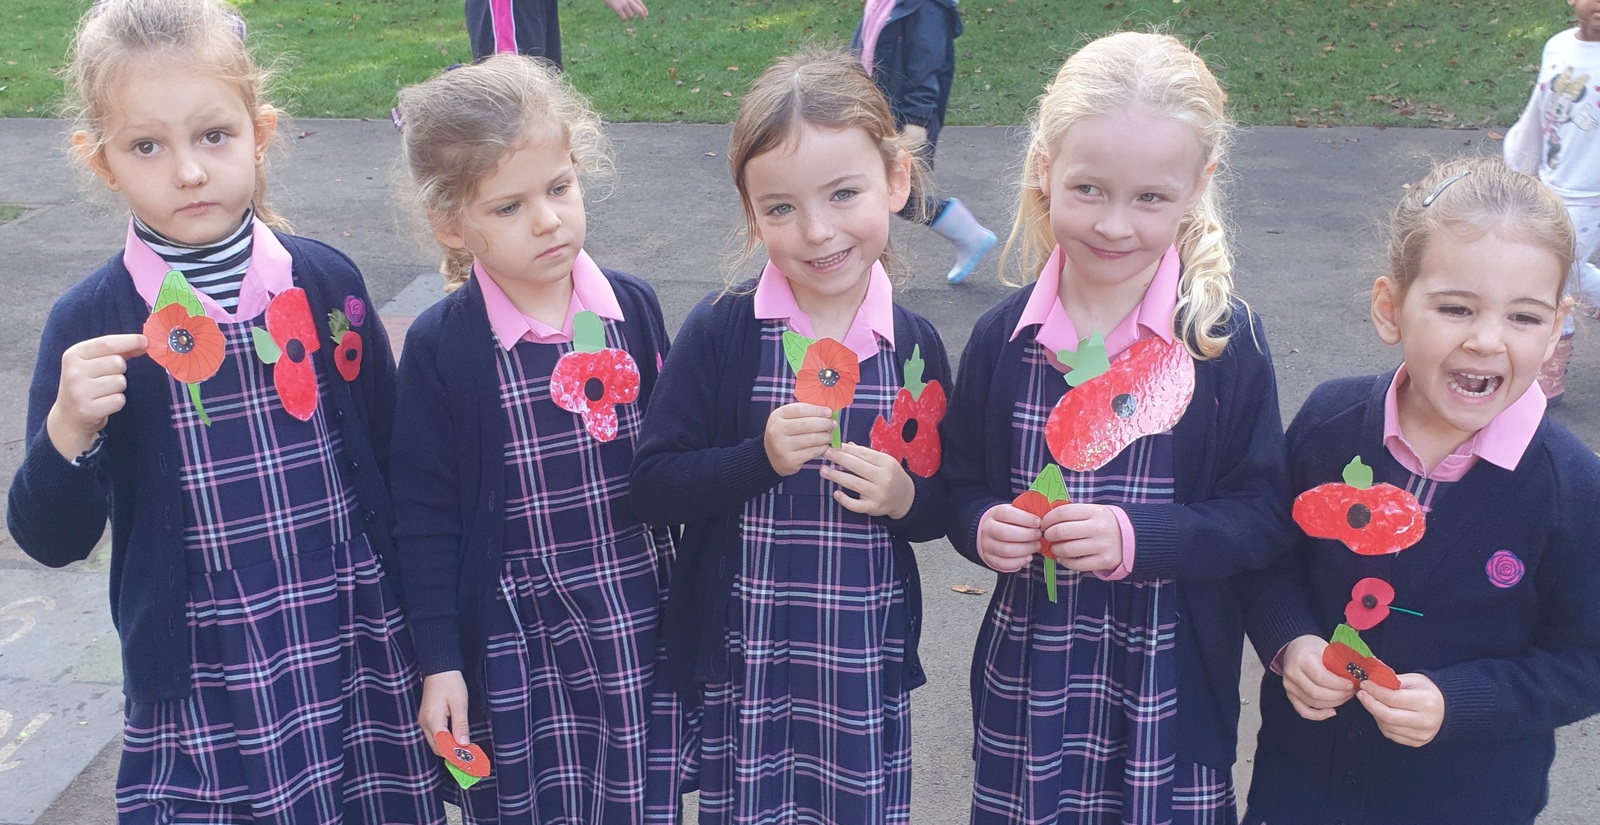 Remembrance Day painted poppies being worn today.